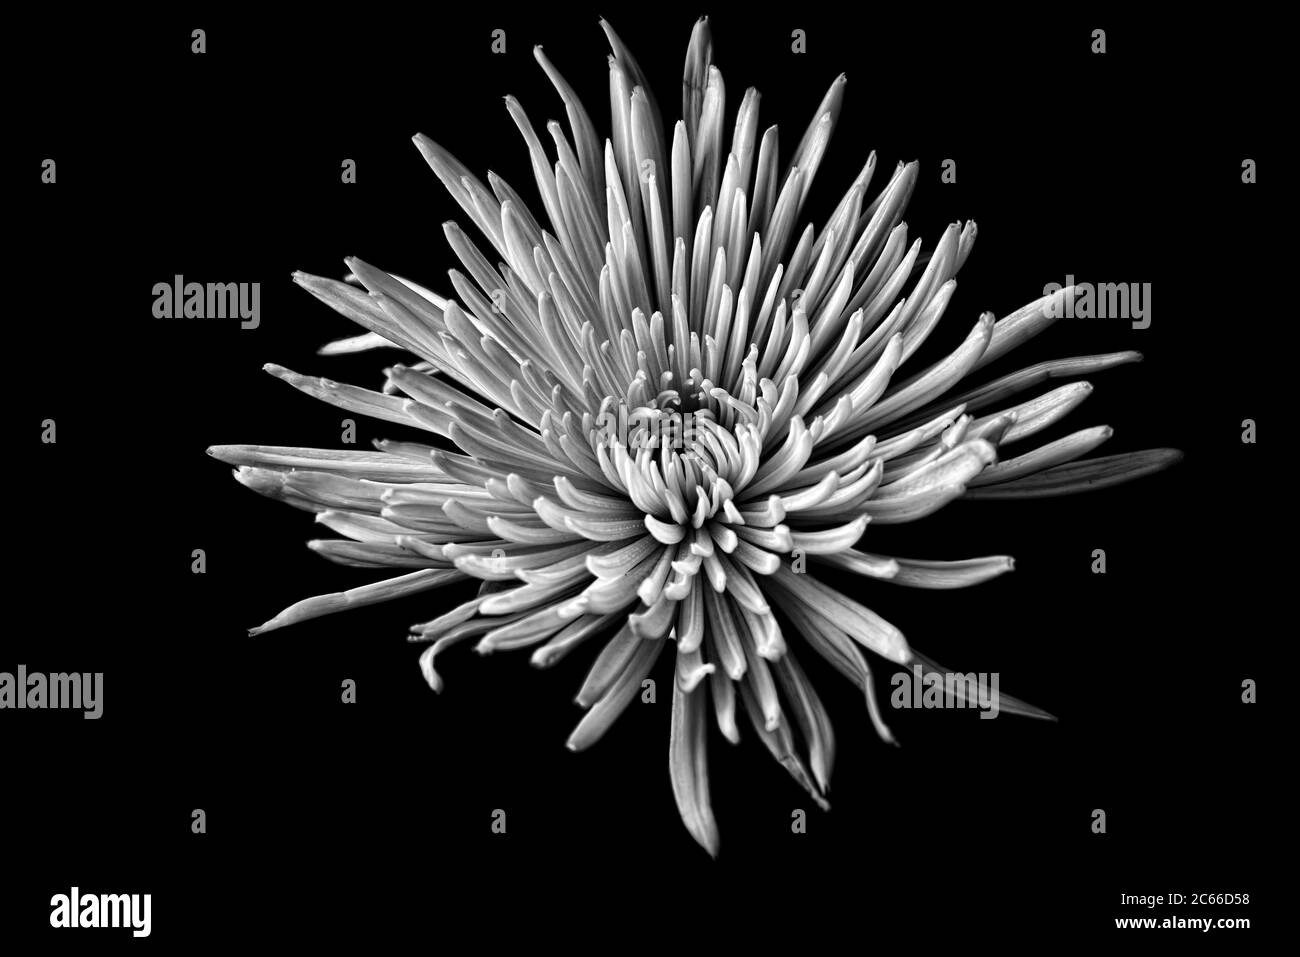 Black and White spider bloom chrysanthemum flower on a black background Stock Photo